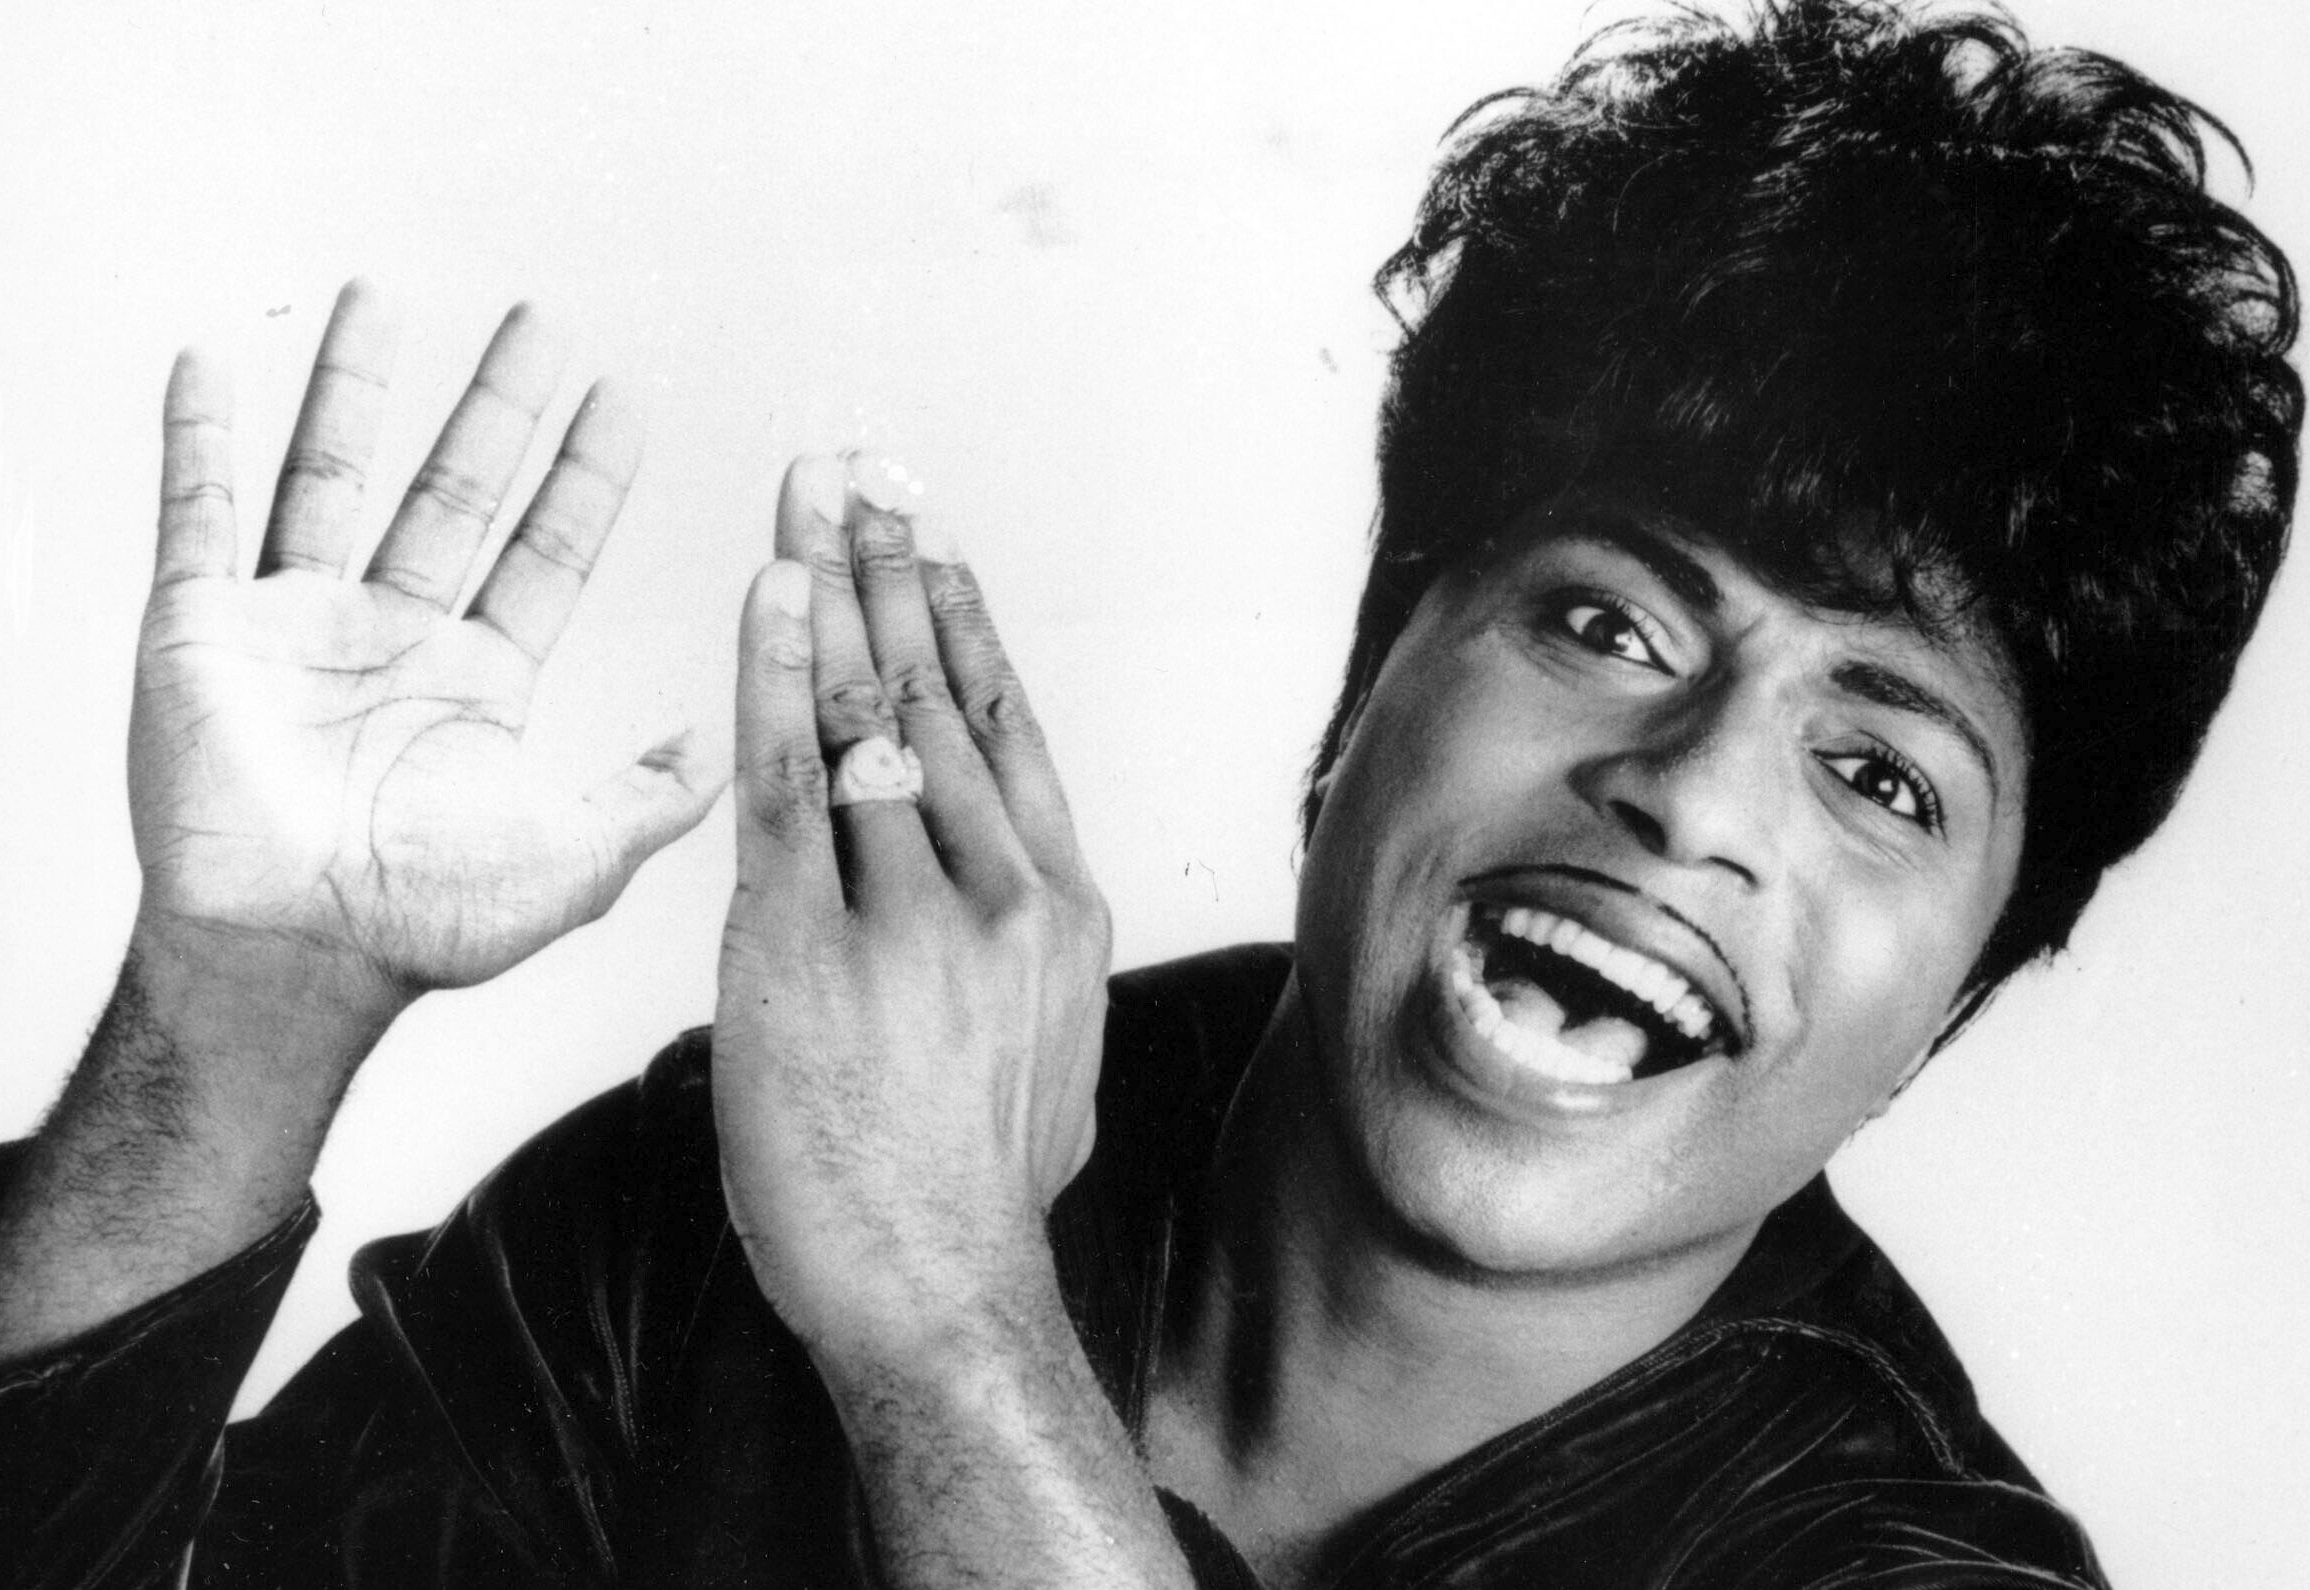 With unforgettable hits such as Tutti Frutti, Long Tall Sally and Good Golly Miss Molly, Little Richard was credited by many of the music greats who followed as having been a huge influence and inspiration